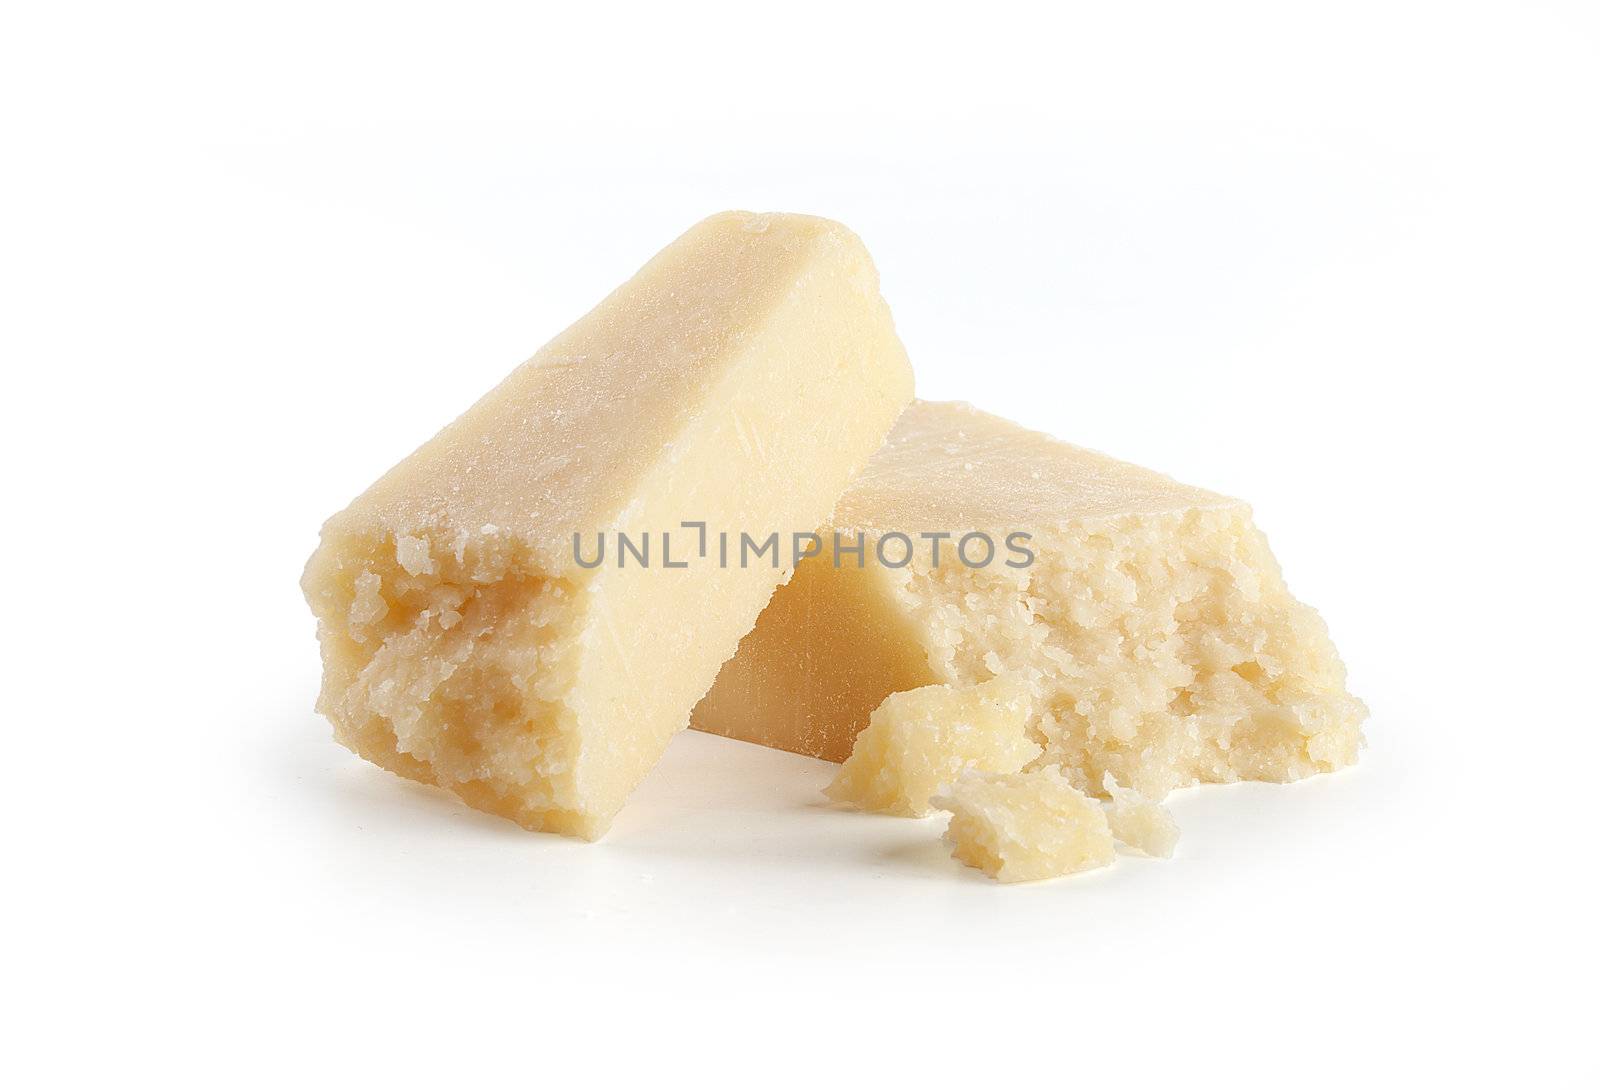 Two pieces of hard cheese on the white background